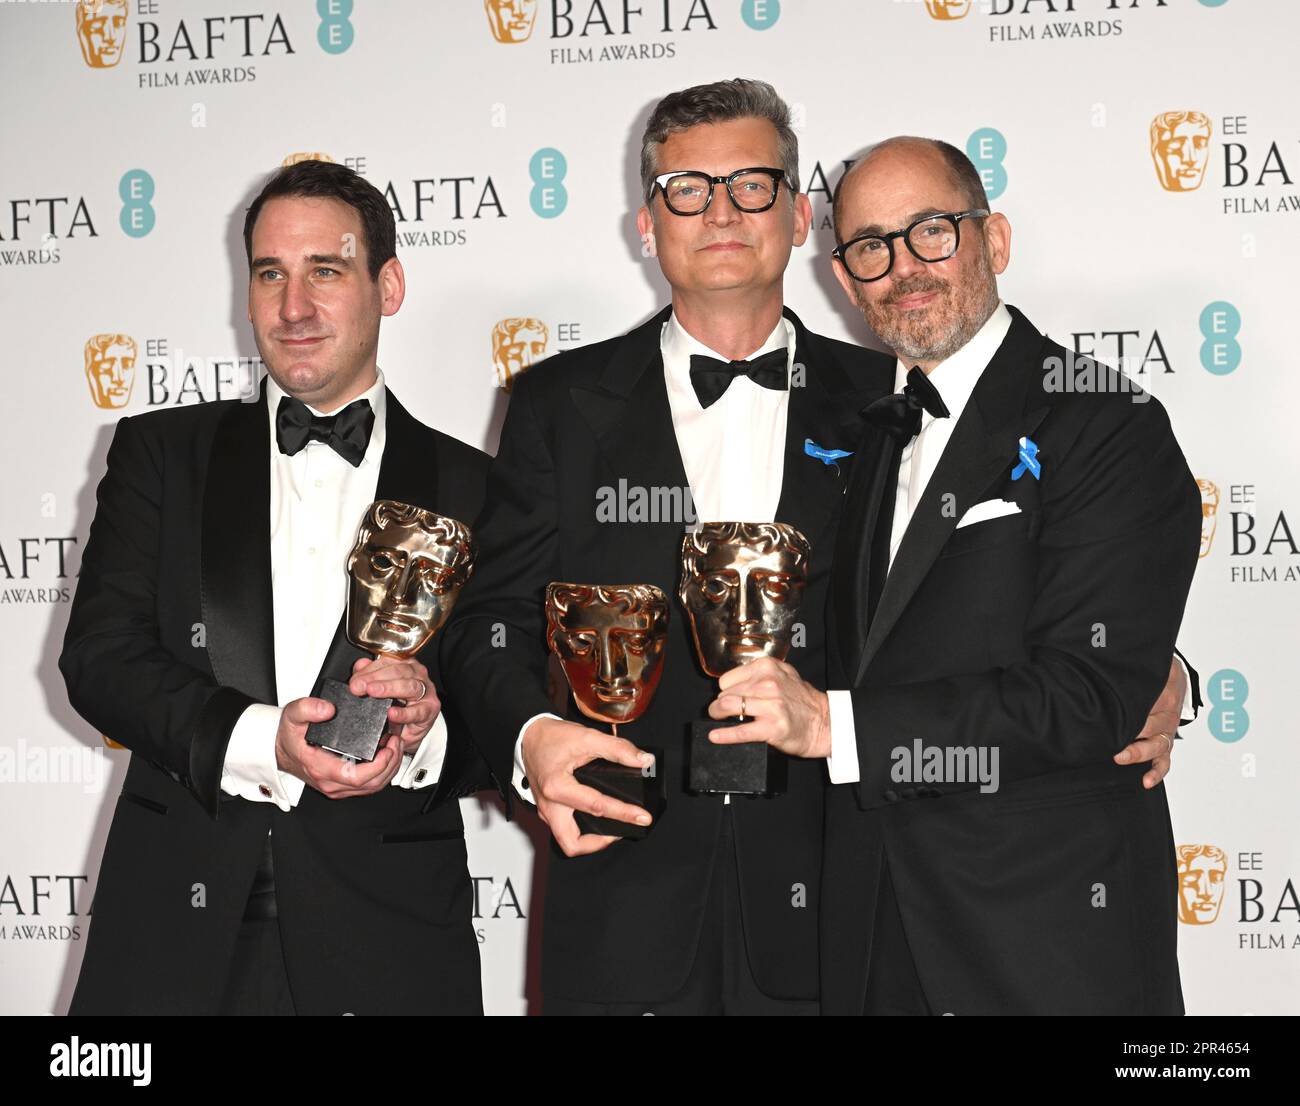 Photo Must Be Credited ©Alpha Press 085000 19/02/2023 James Friend Malte Grunert and  Edward Berger EE Bafta British Academy Film Awards 2023 Pressroom At The Royal Festival Hall In London Stock Photo